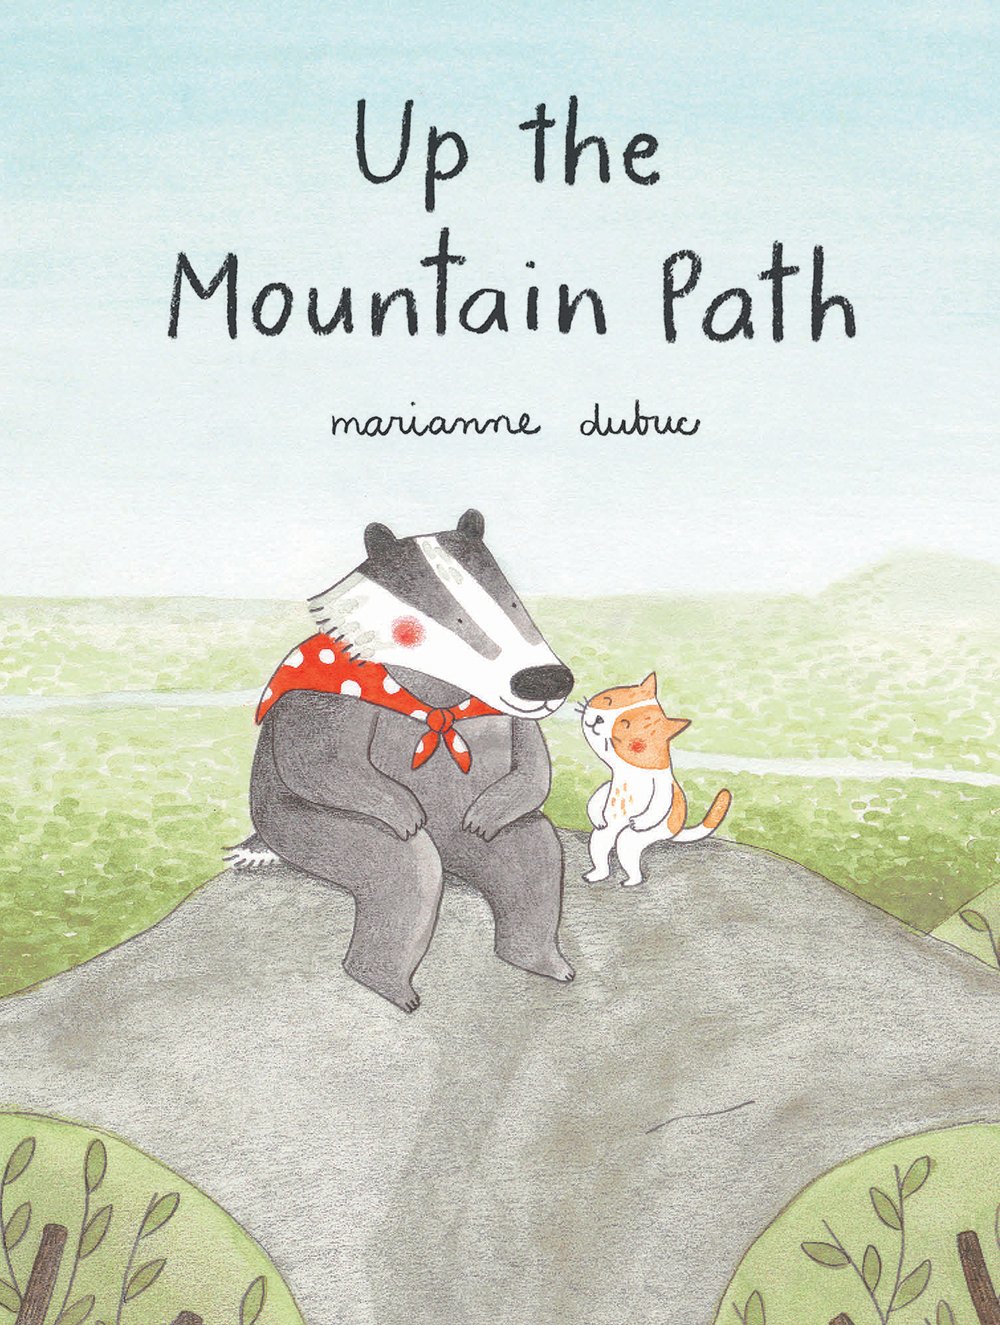 A book cover for Up the Mountain Path